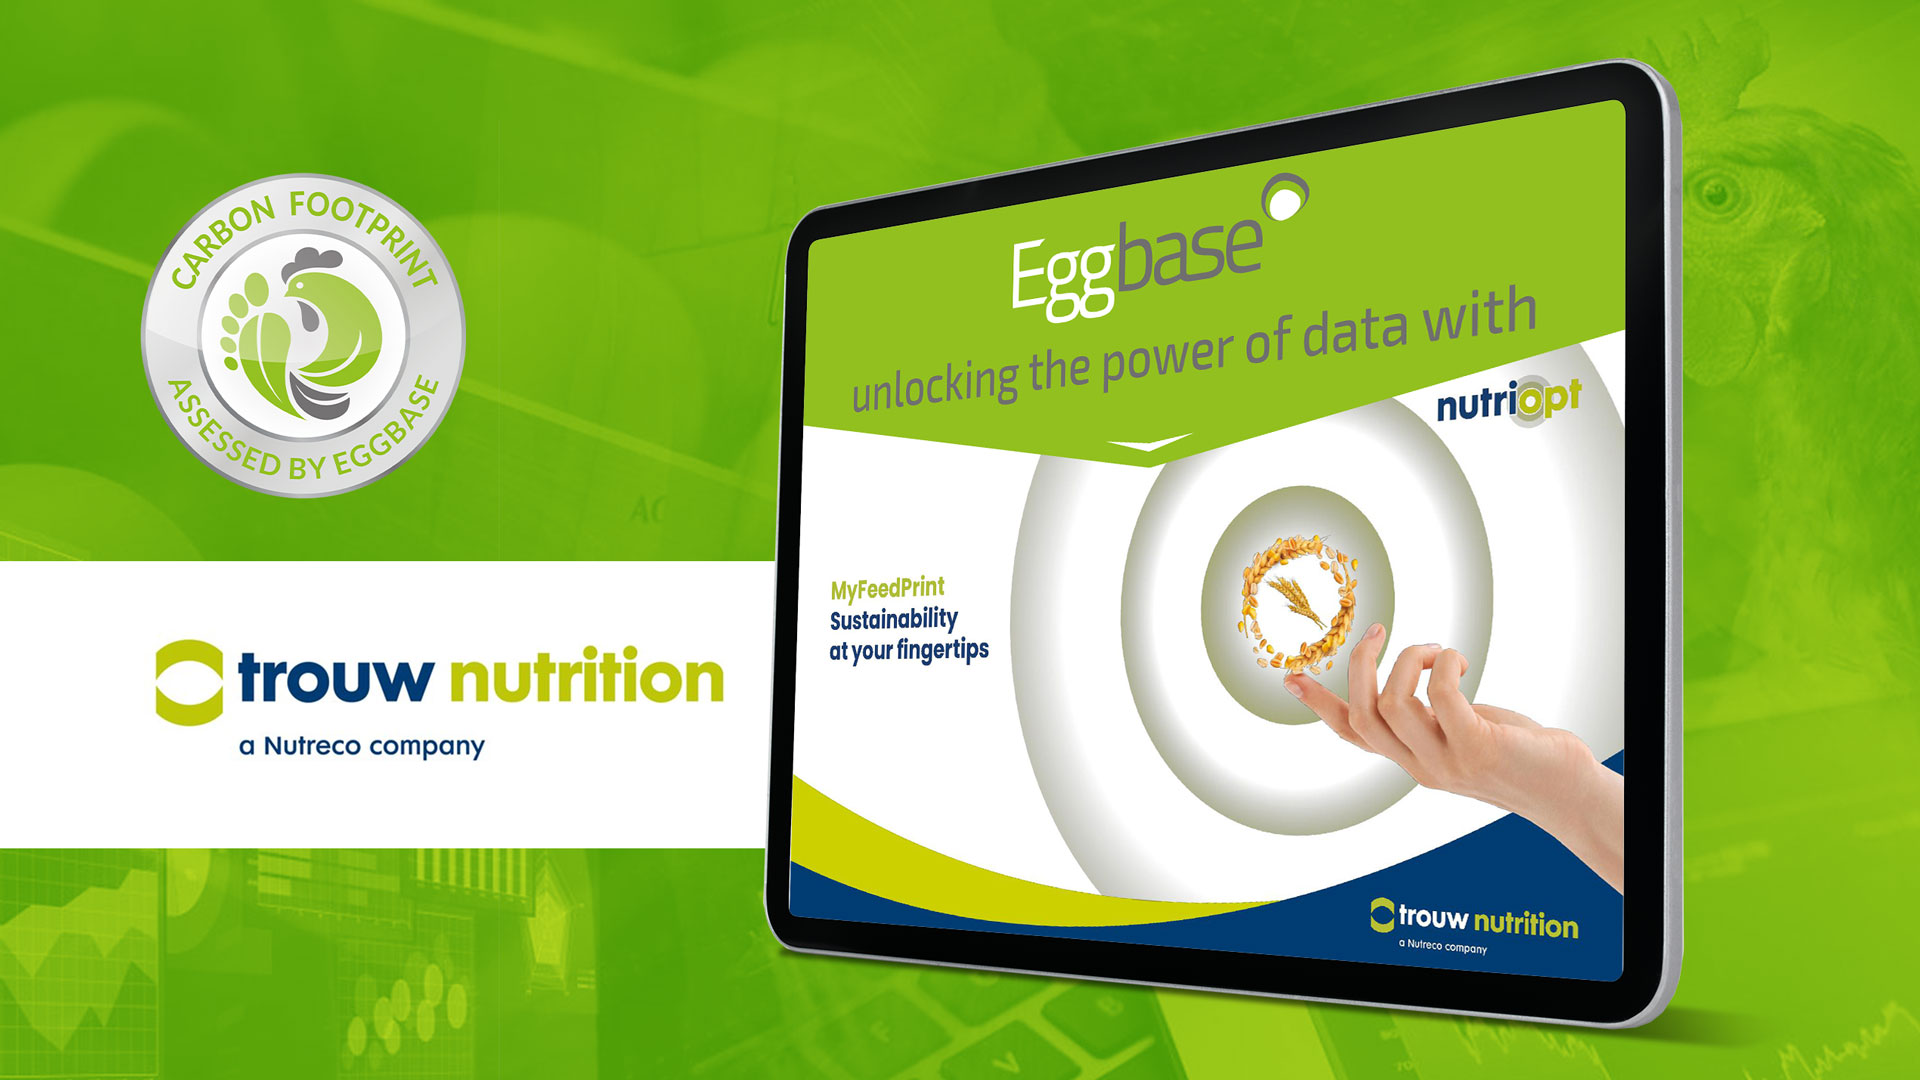 Trouw Nutrition Partner With Eggbase To Offer Poultry Industry The Most Precise Footprint Yet